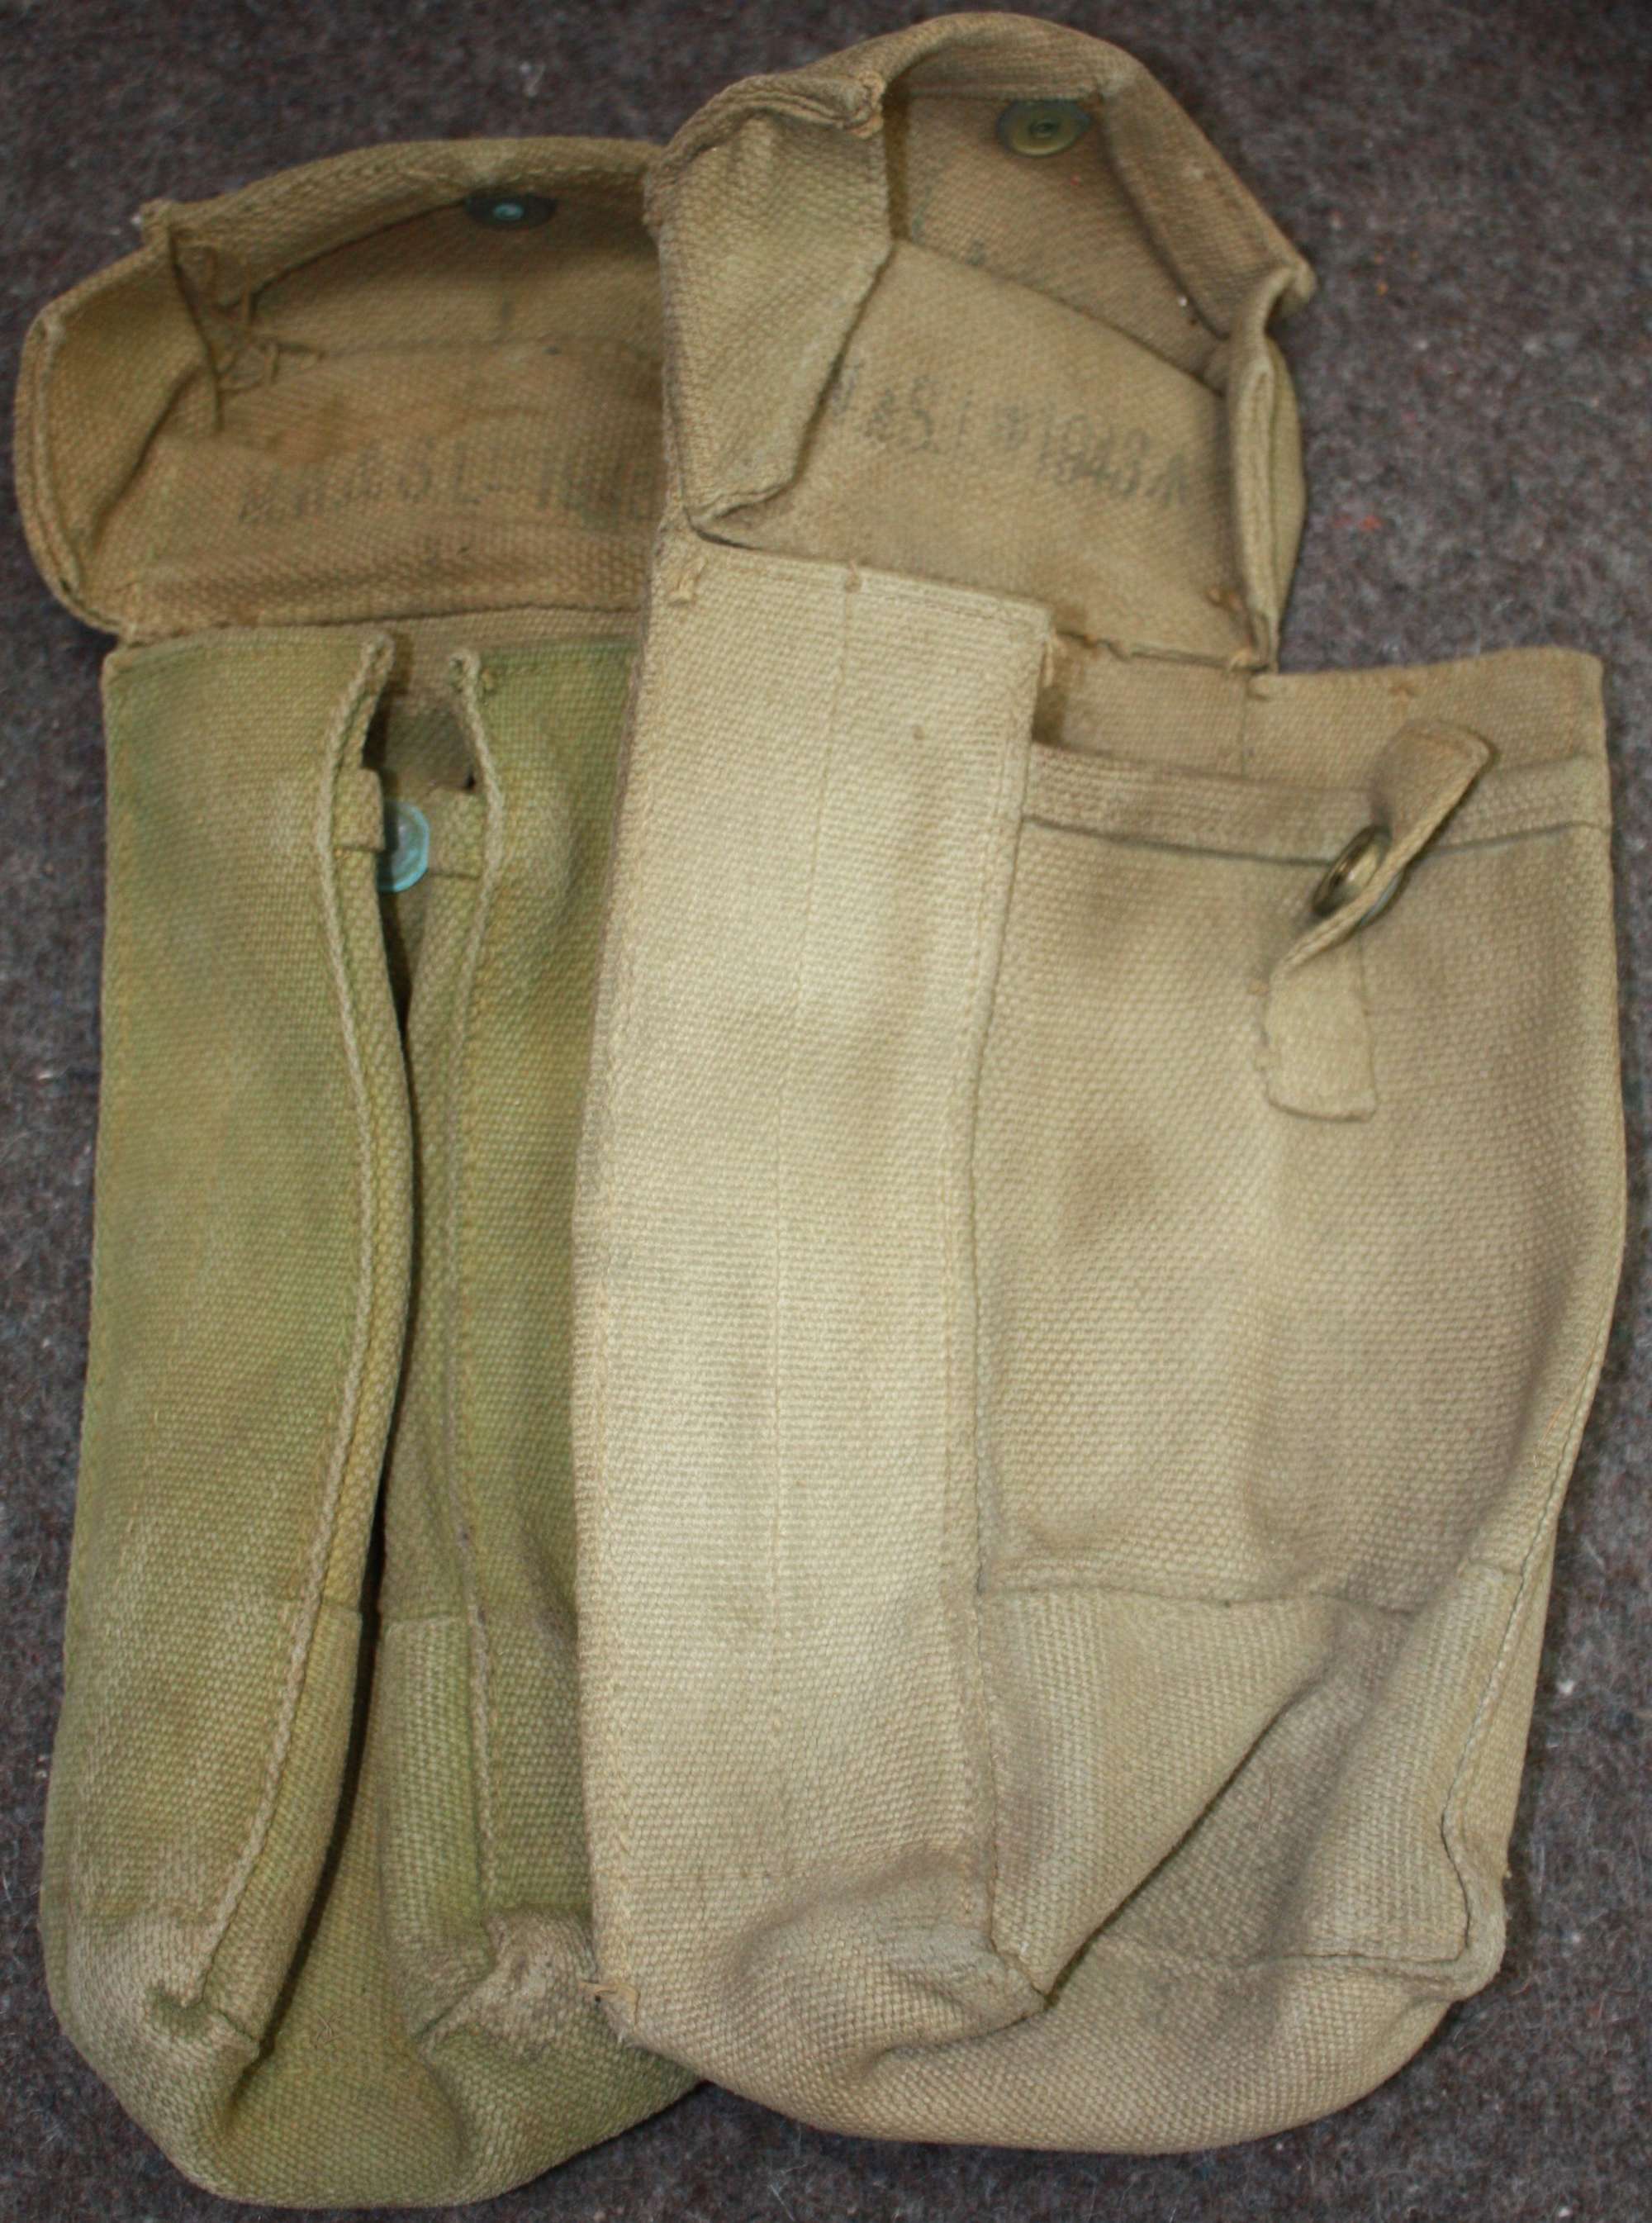 A PAIR OF MAKER MATCHING 1943 DATED 27 PATTERN AMMO POUCHES